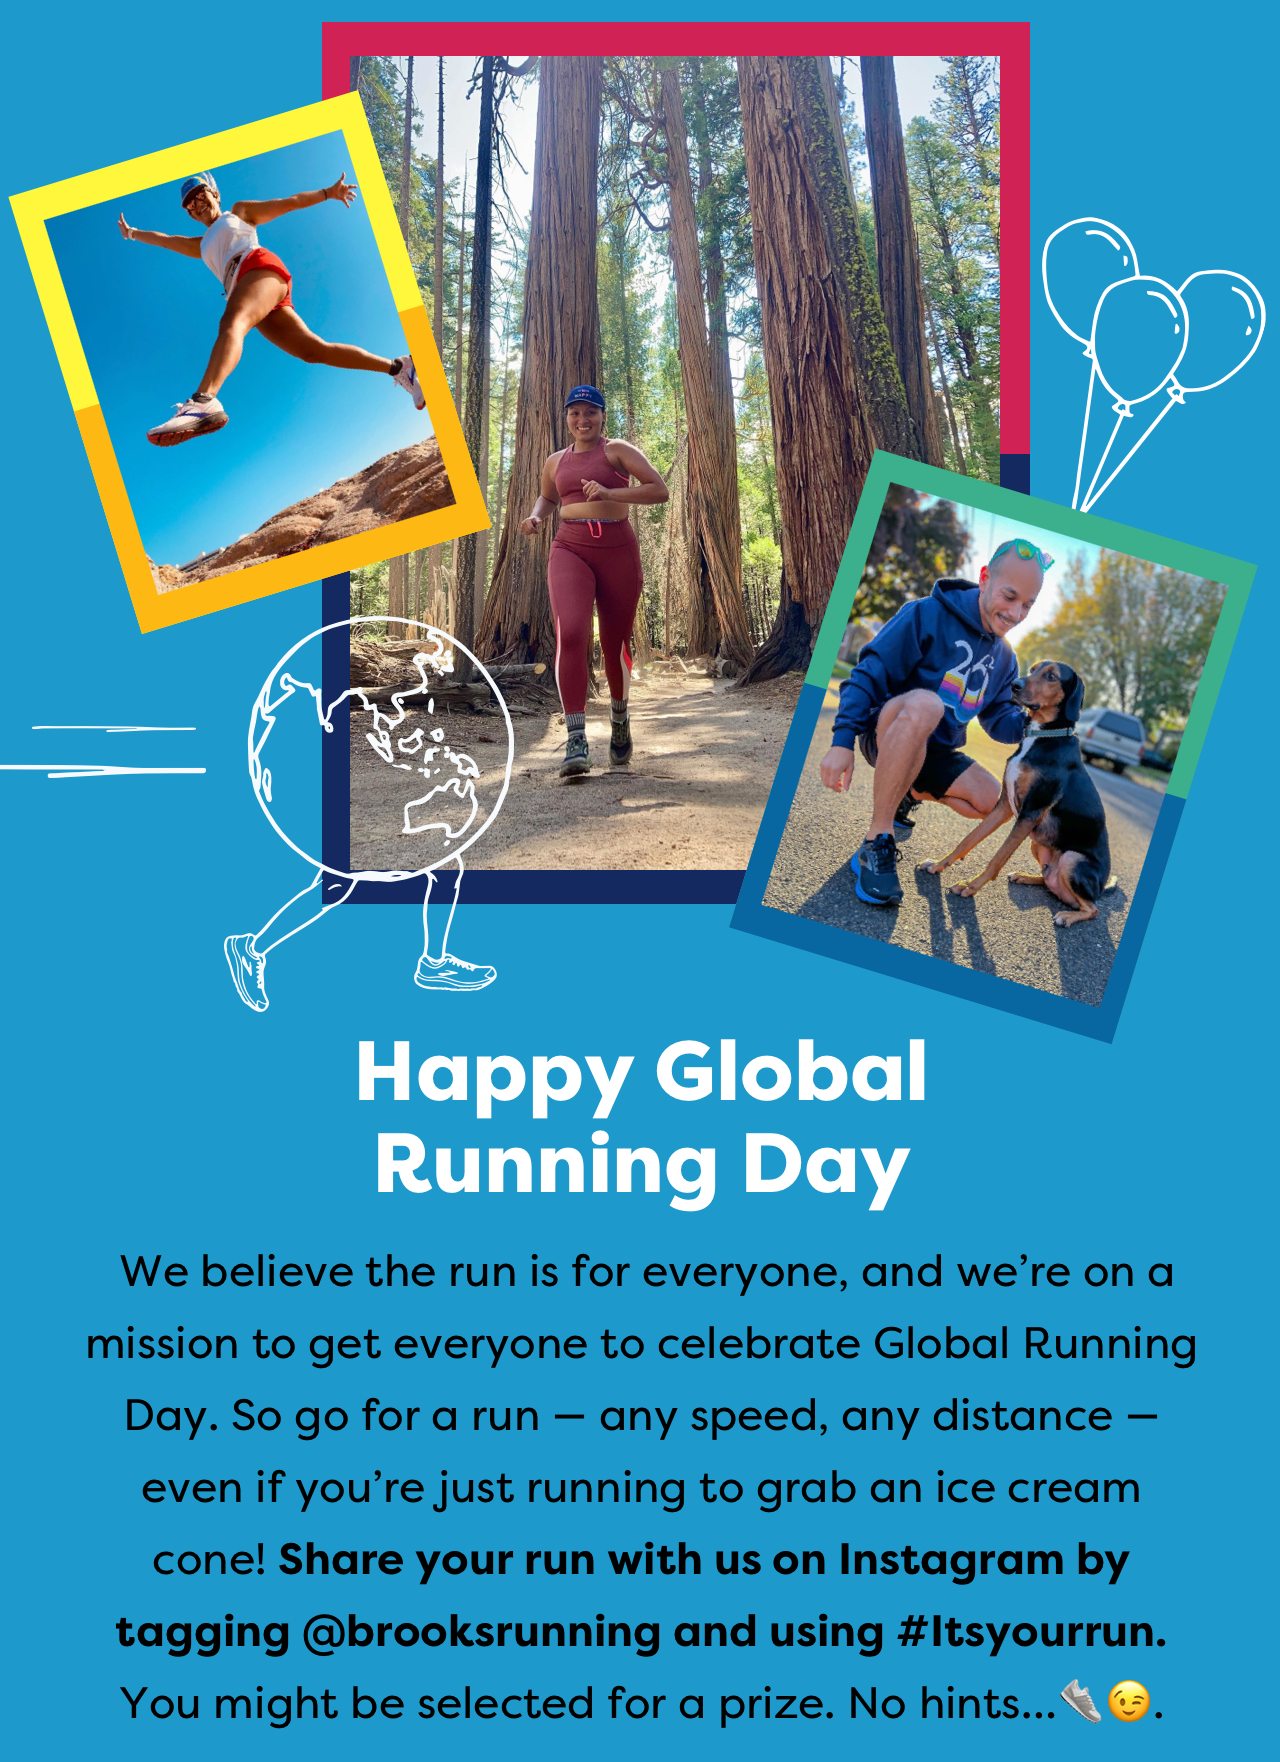 Happy Global Running Day - We believe the run is for everyone, and we're on a mission to get everyone to celebrate Global Running Day. So go on a run - any speed, any distance - even if you're just running to grab an ice cream cone! Share your run with us on Instagram by tagging @brooksrunning and using #Itsyourrun. You might be selected for a prize. No hints...